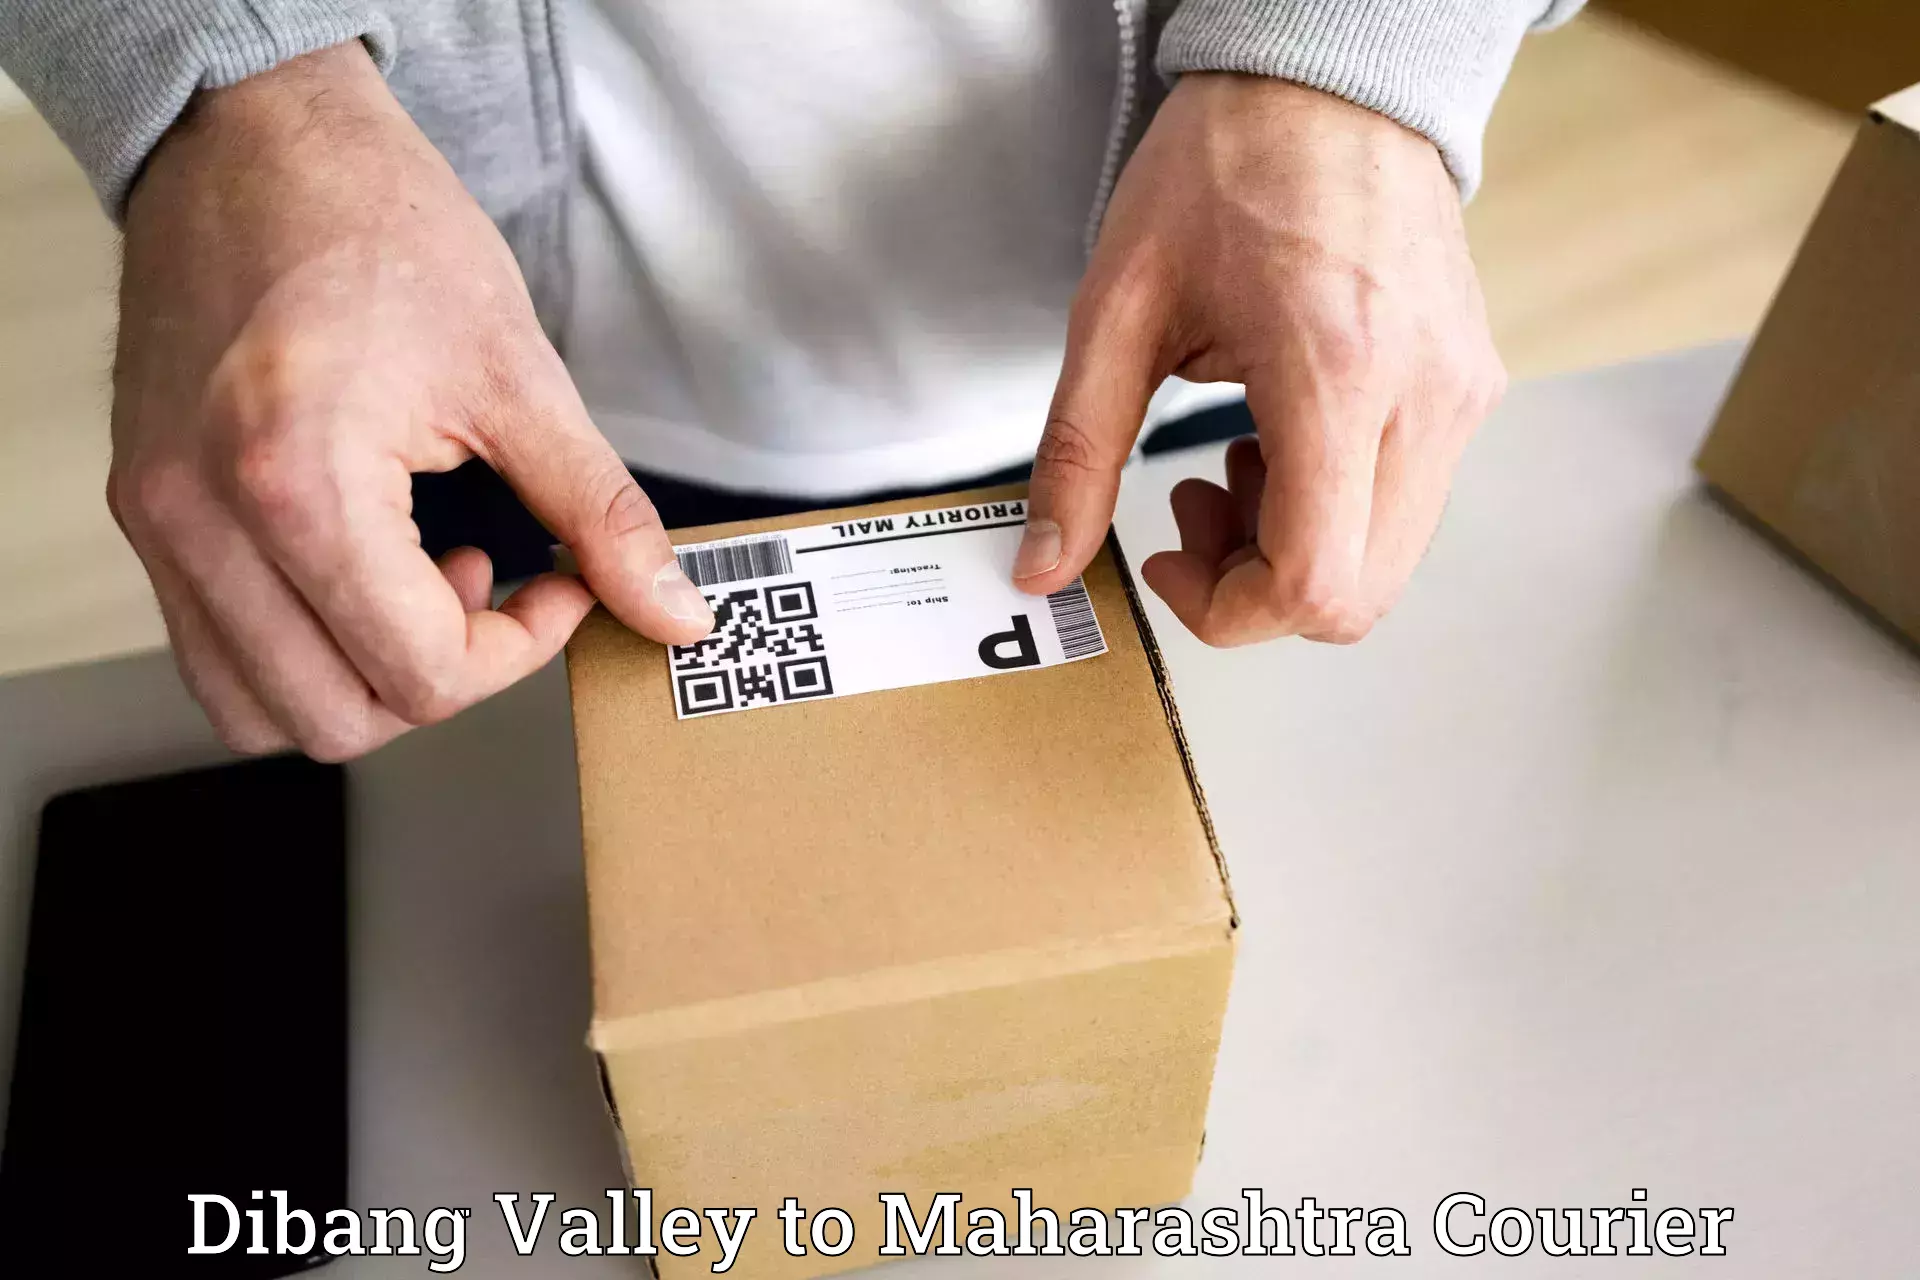 Enhanced shipping experience Dibang Valley to Lonere